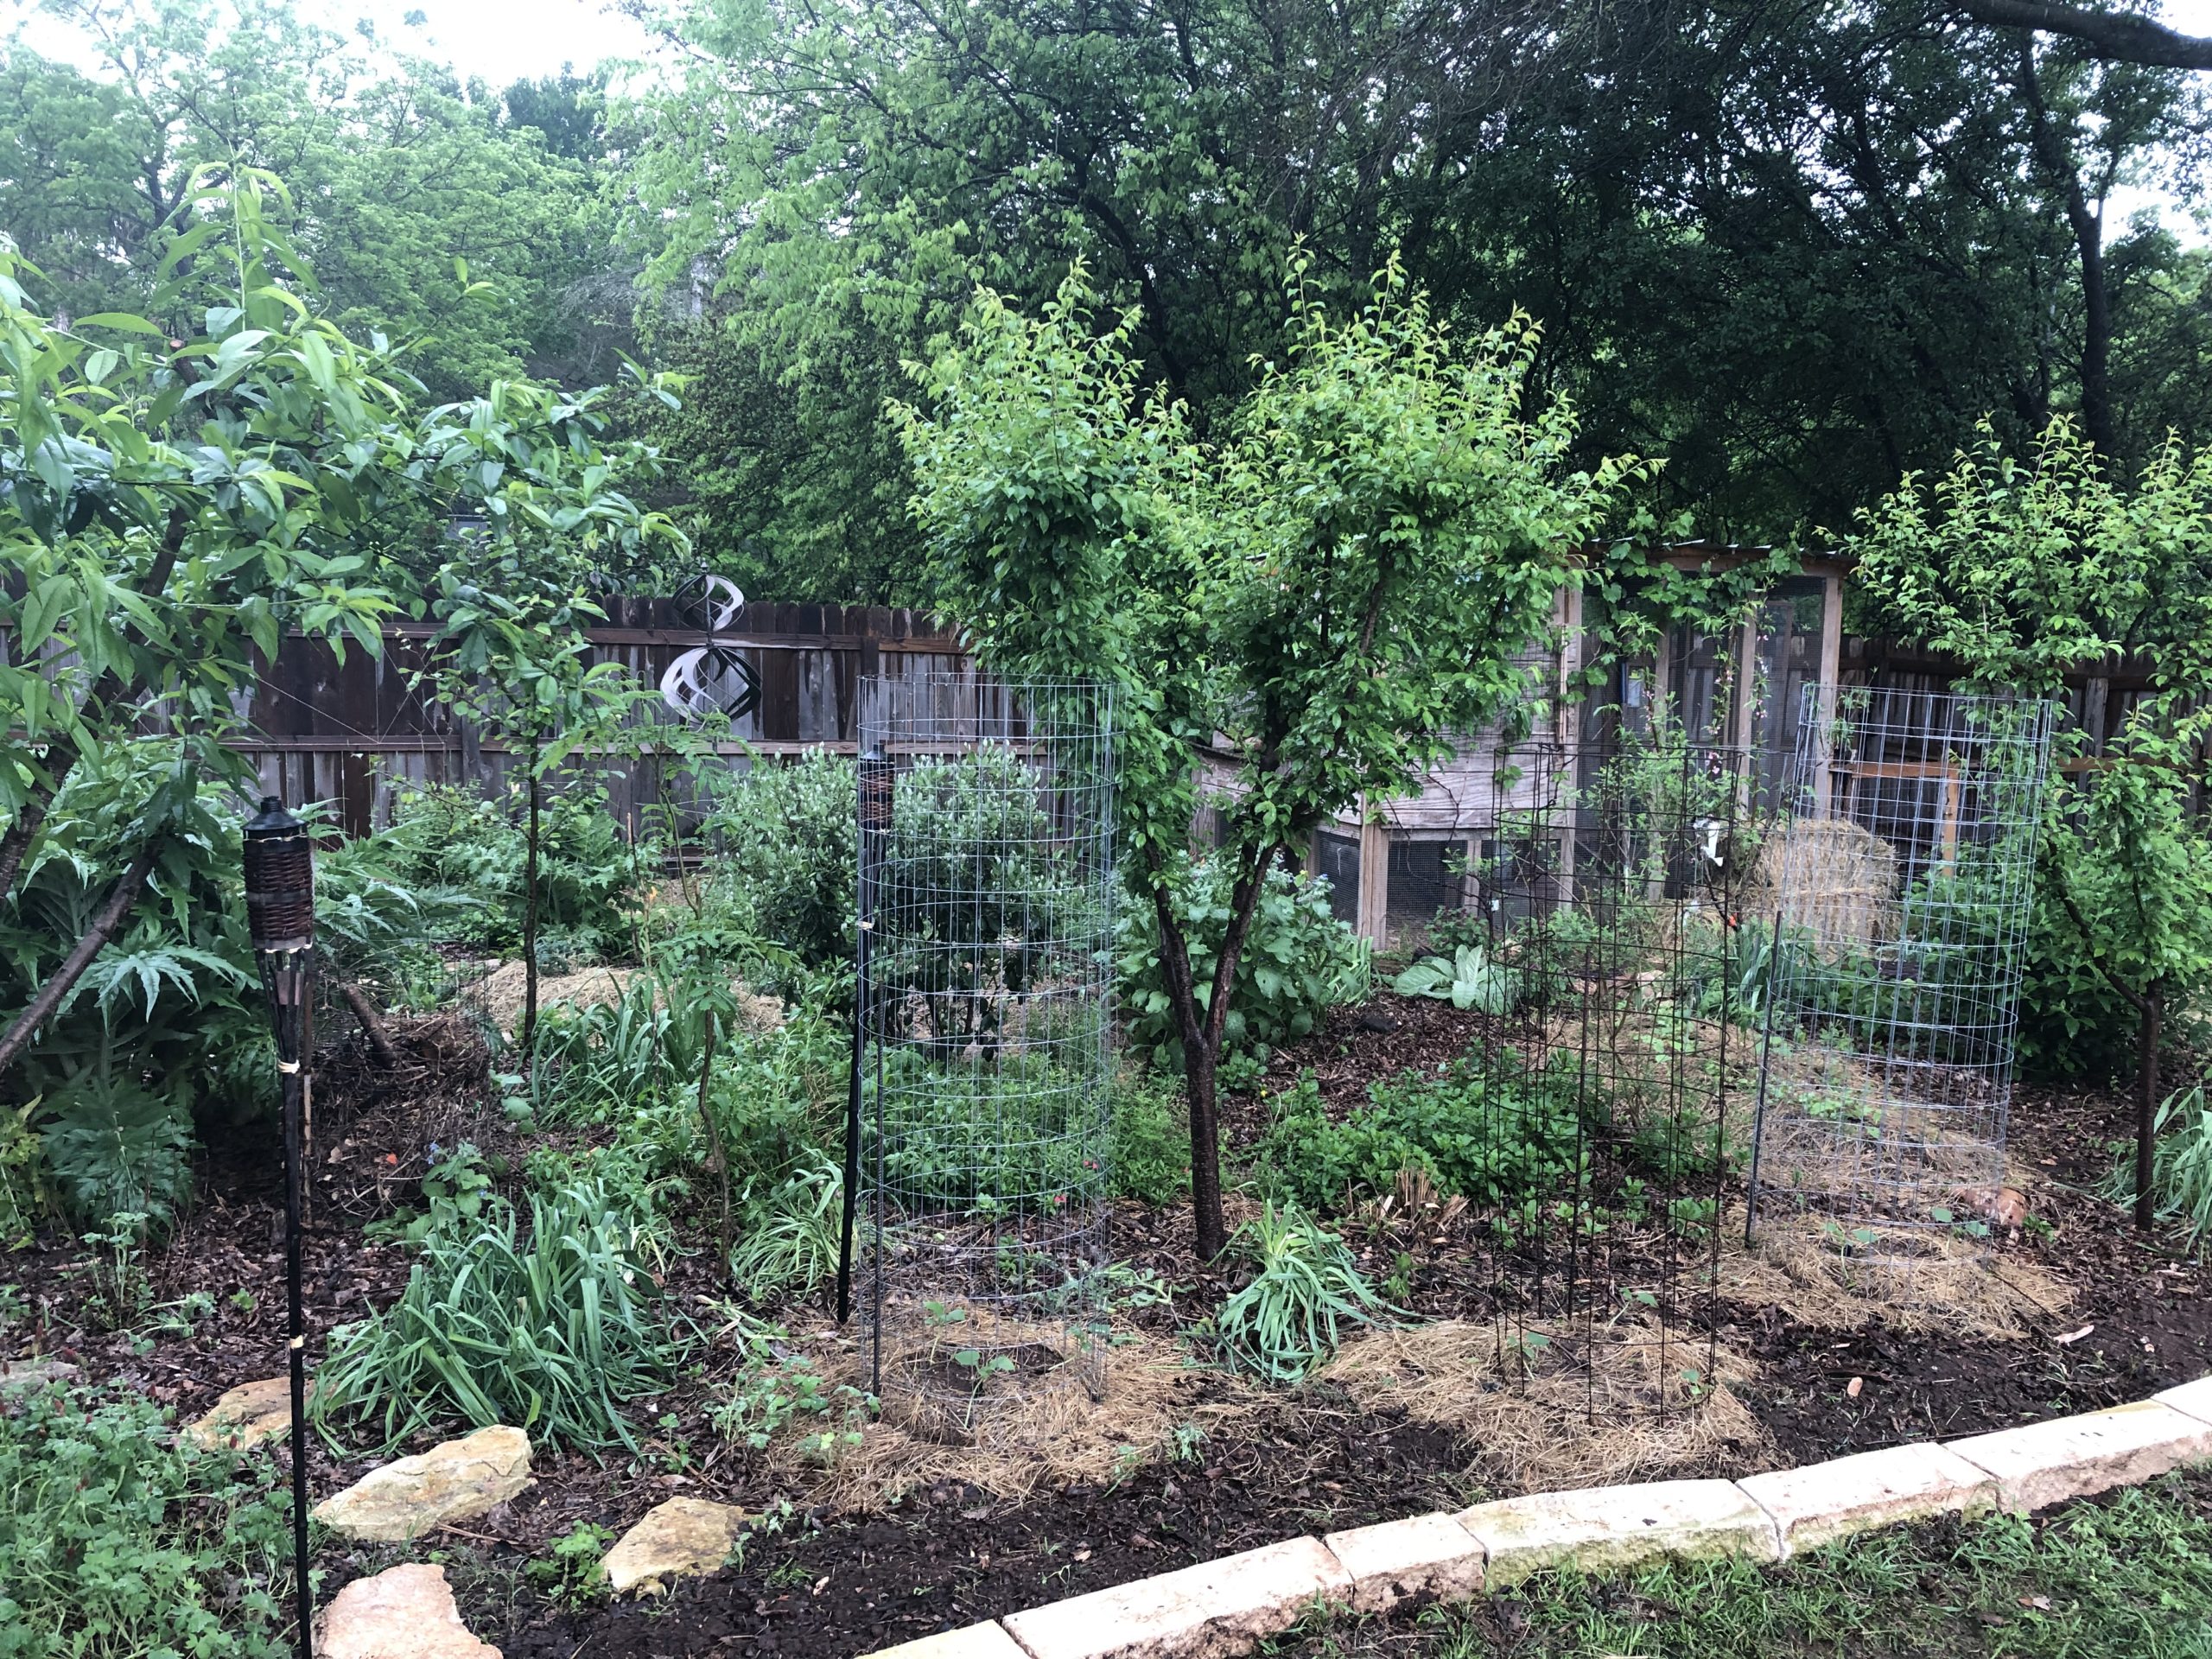 A micro orchard with several fruit trees planted close together